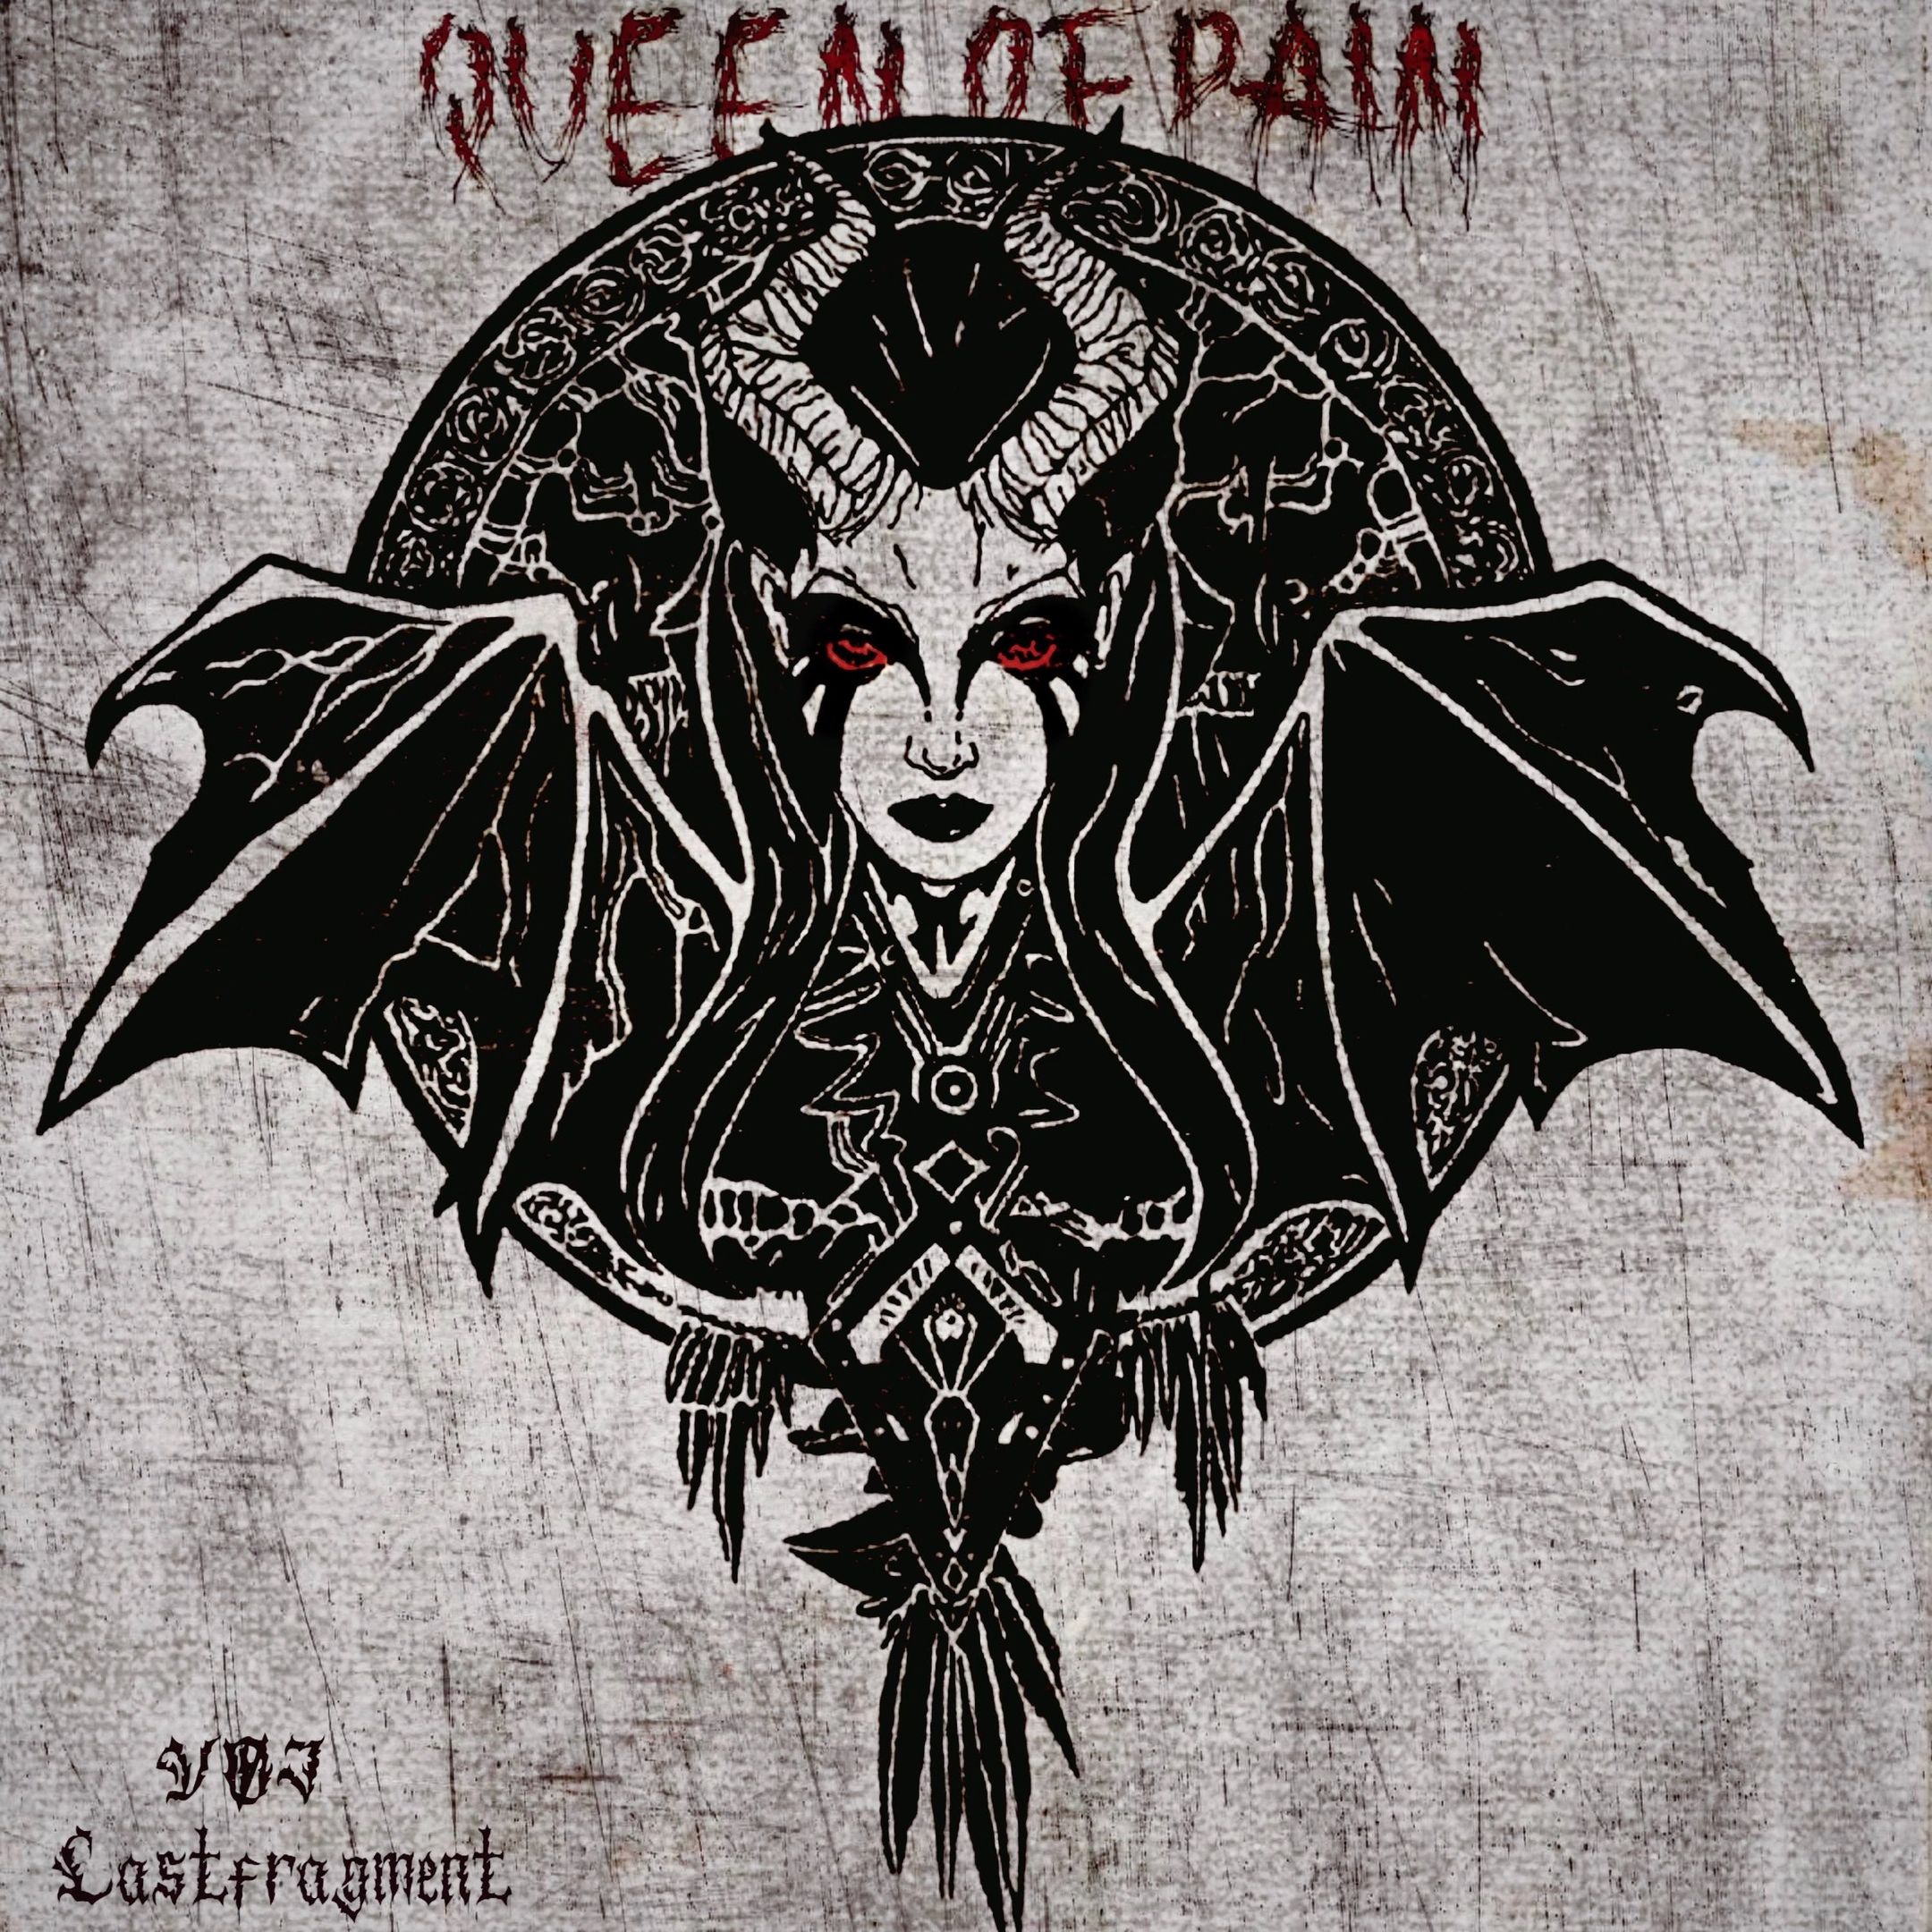 Budata VØJ & Lastfragment - Queen of Pain